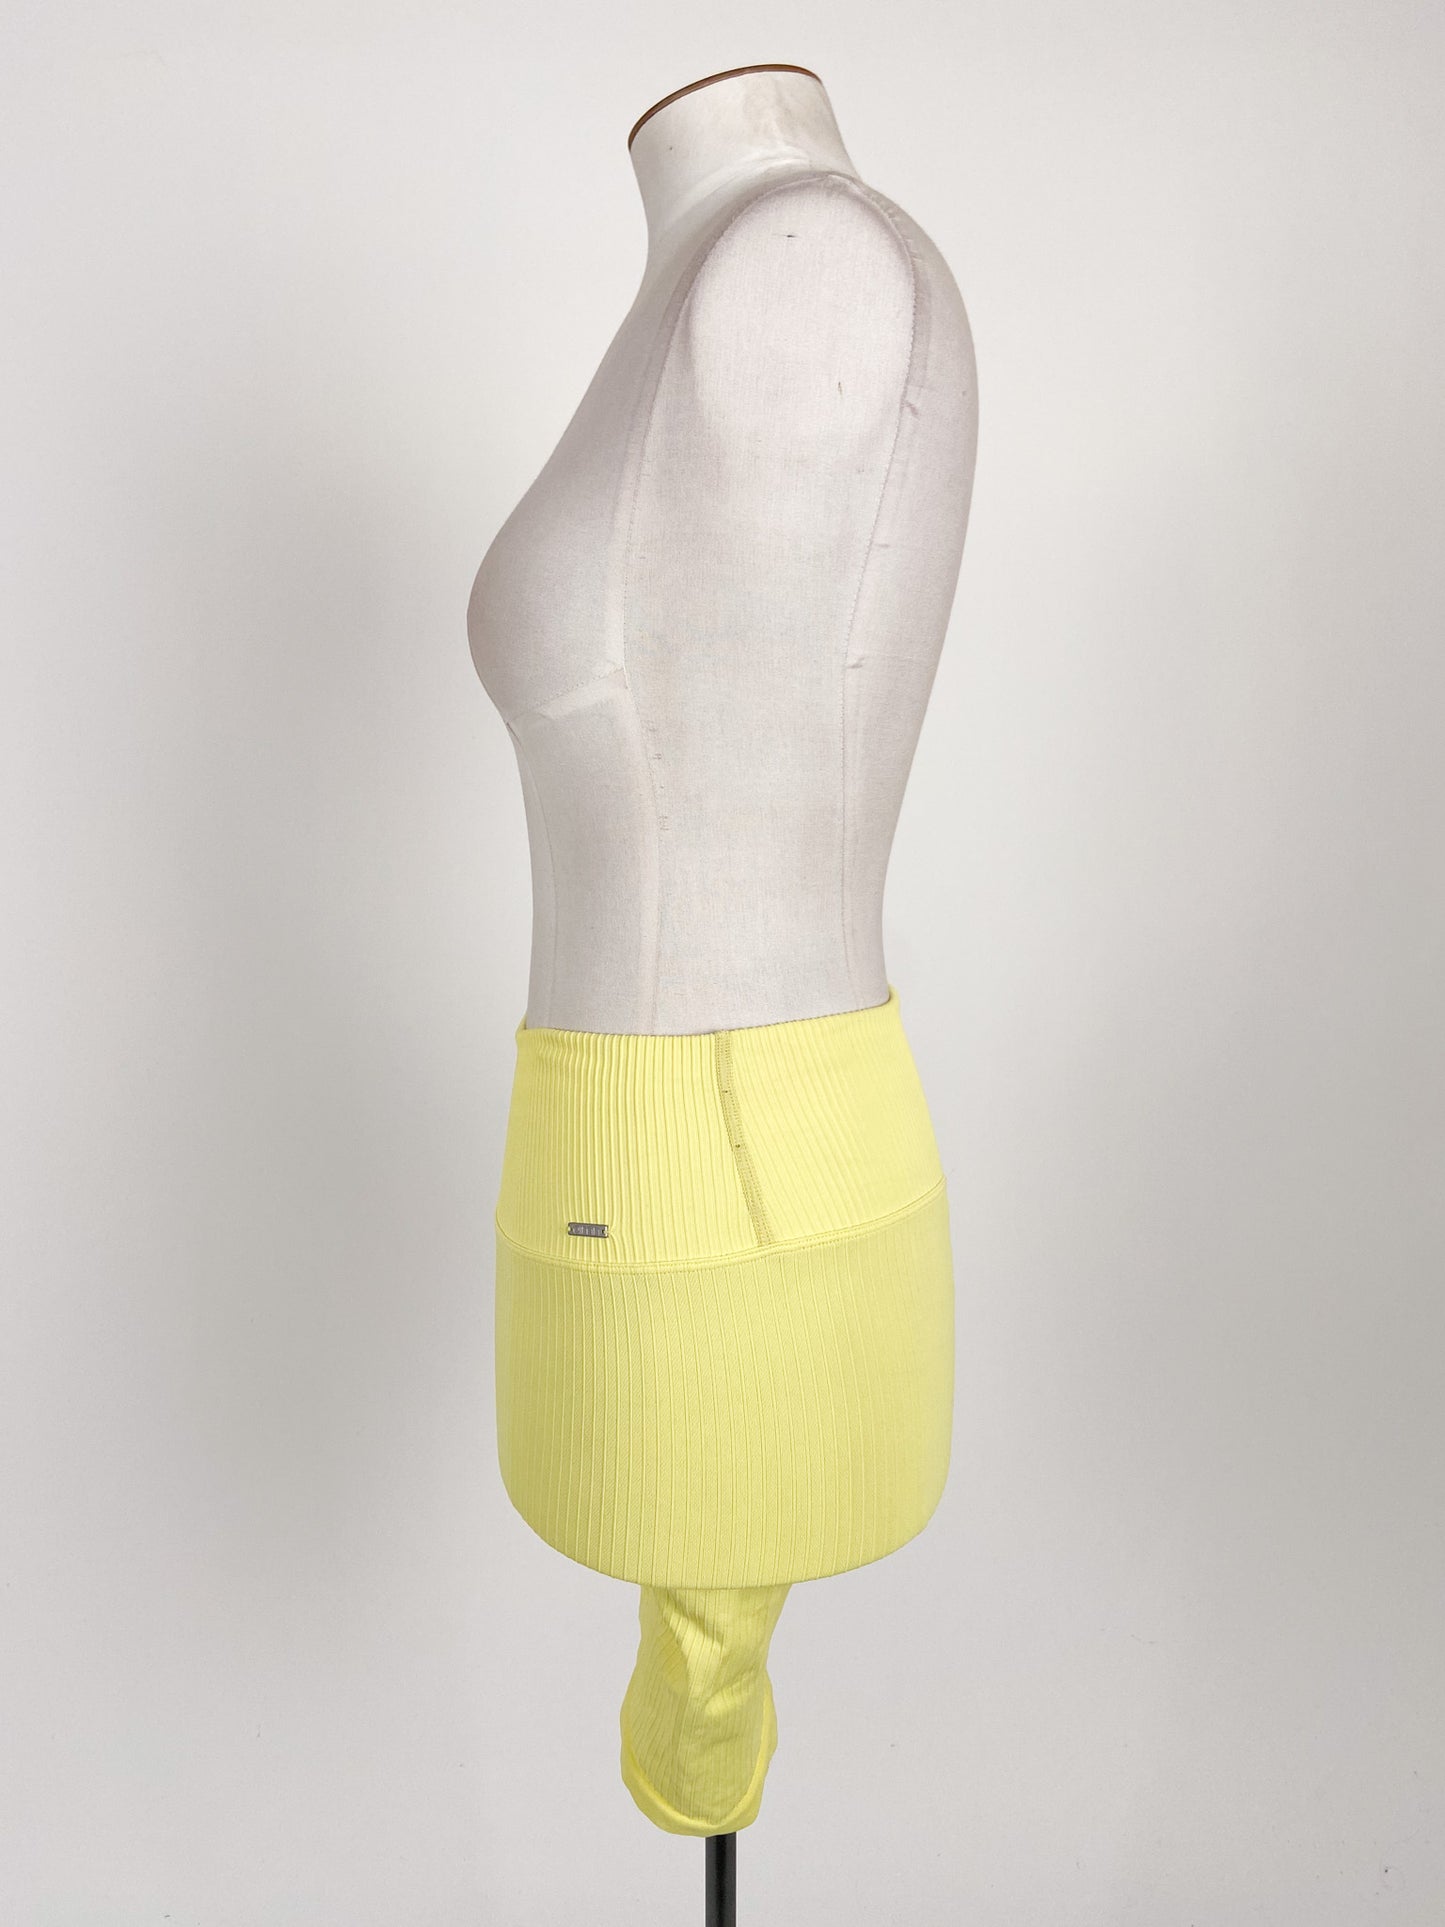 Aim'n | Yellow Casual Activewear Bottom | Size M